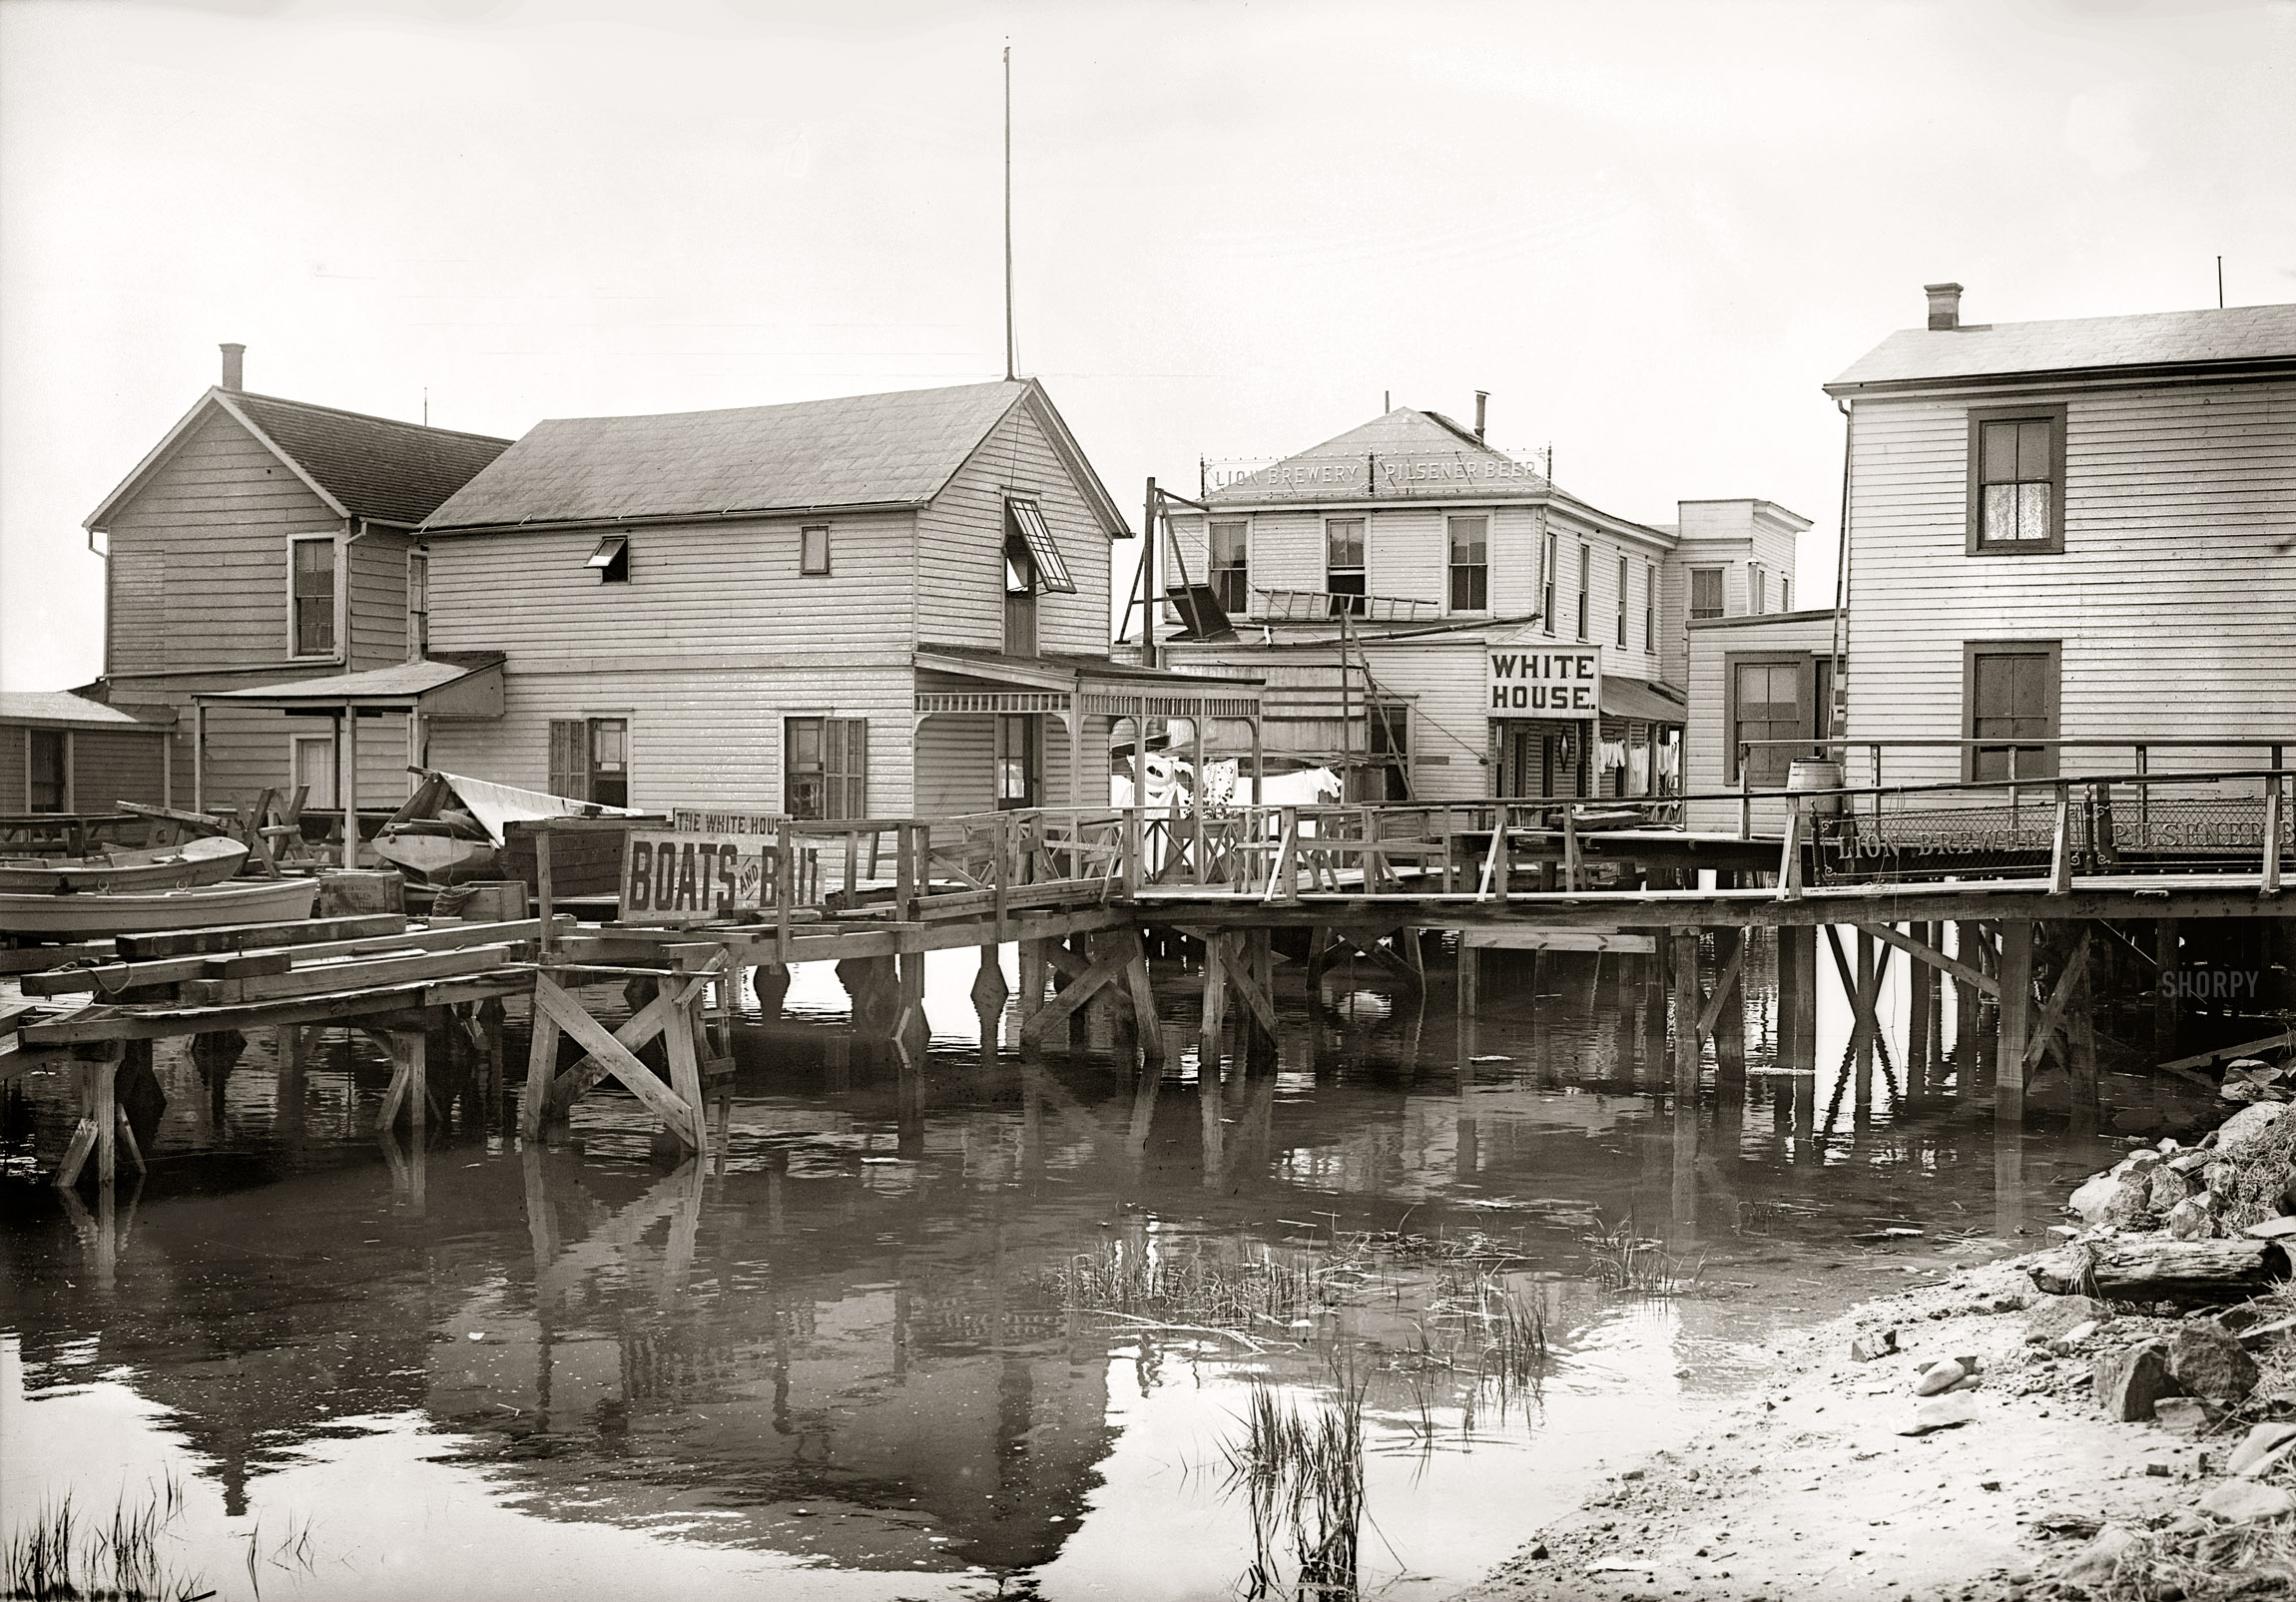 New York, July 1910. "Goose Creek, houses on the water, Jamaica Bay, Long Island." 5x7 glass negative, George Grantham Bain Collection. View full size.